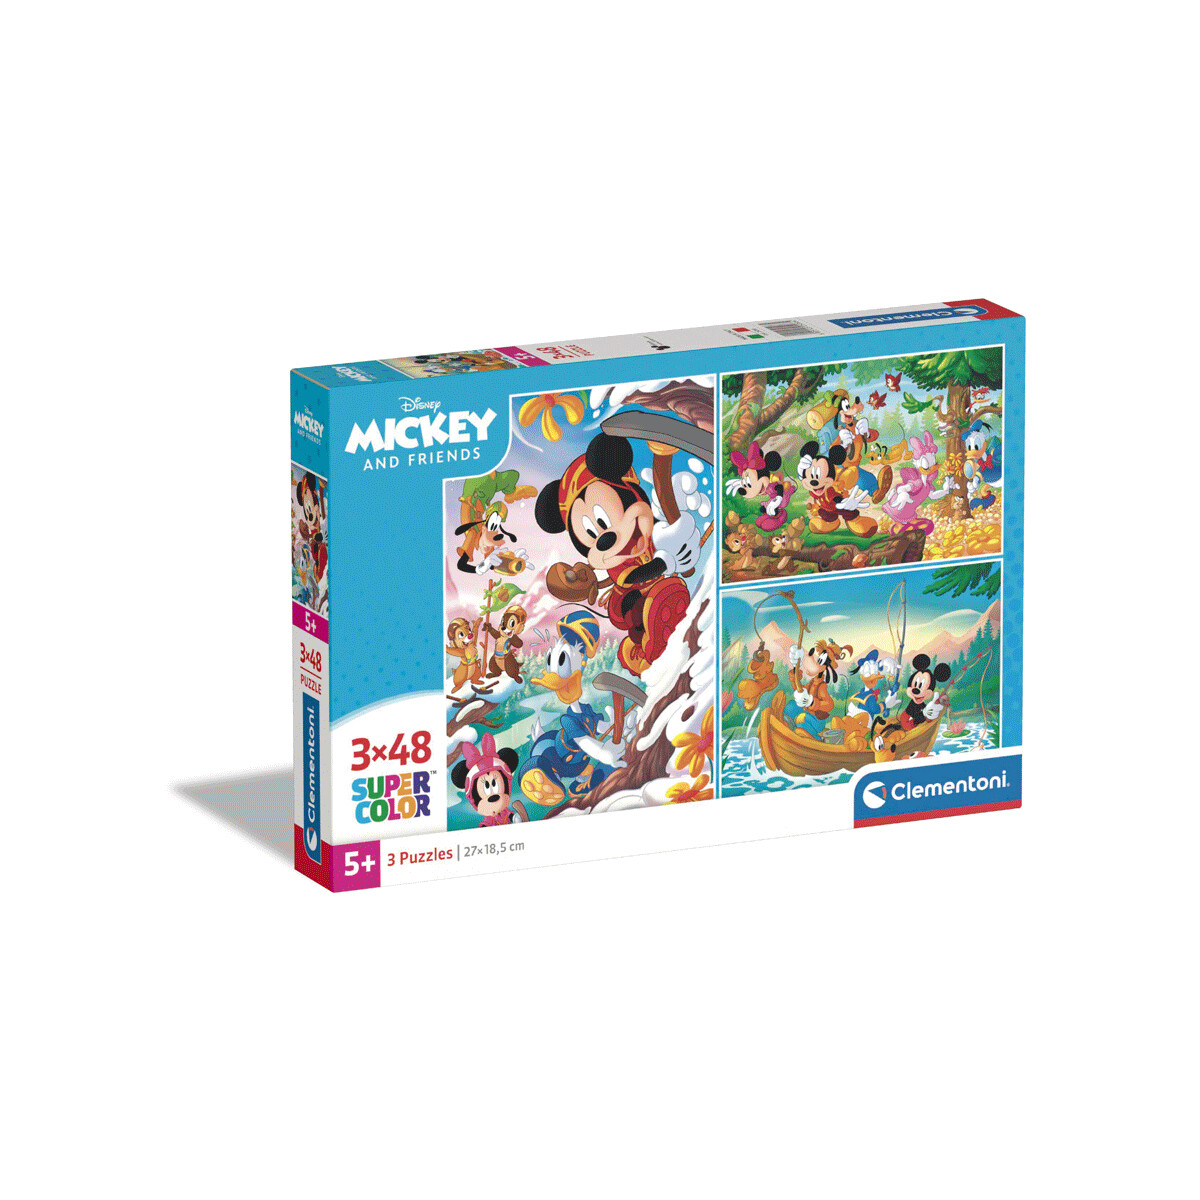 Clementoni - 25266 - puzzle 3x48 mickey and friends 27 x 19 cm - 